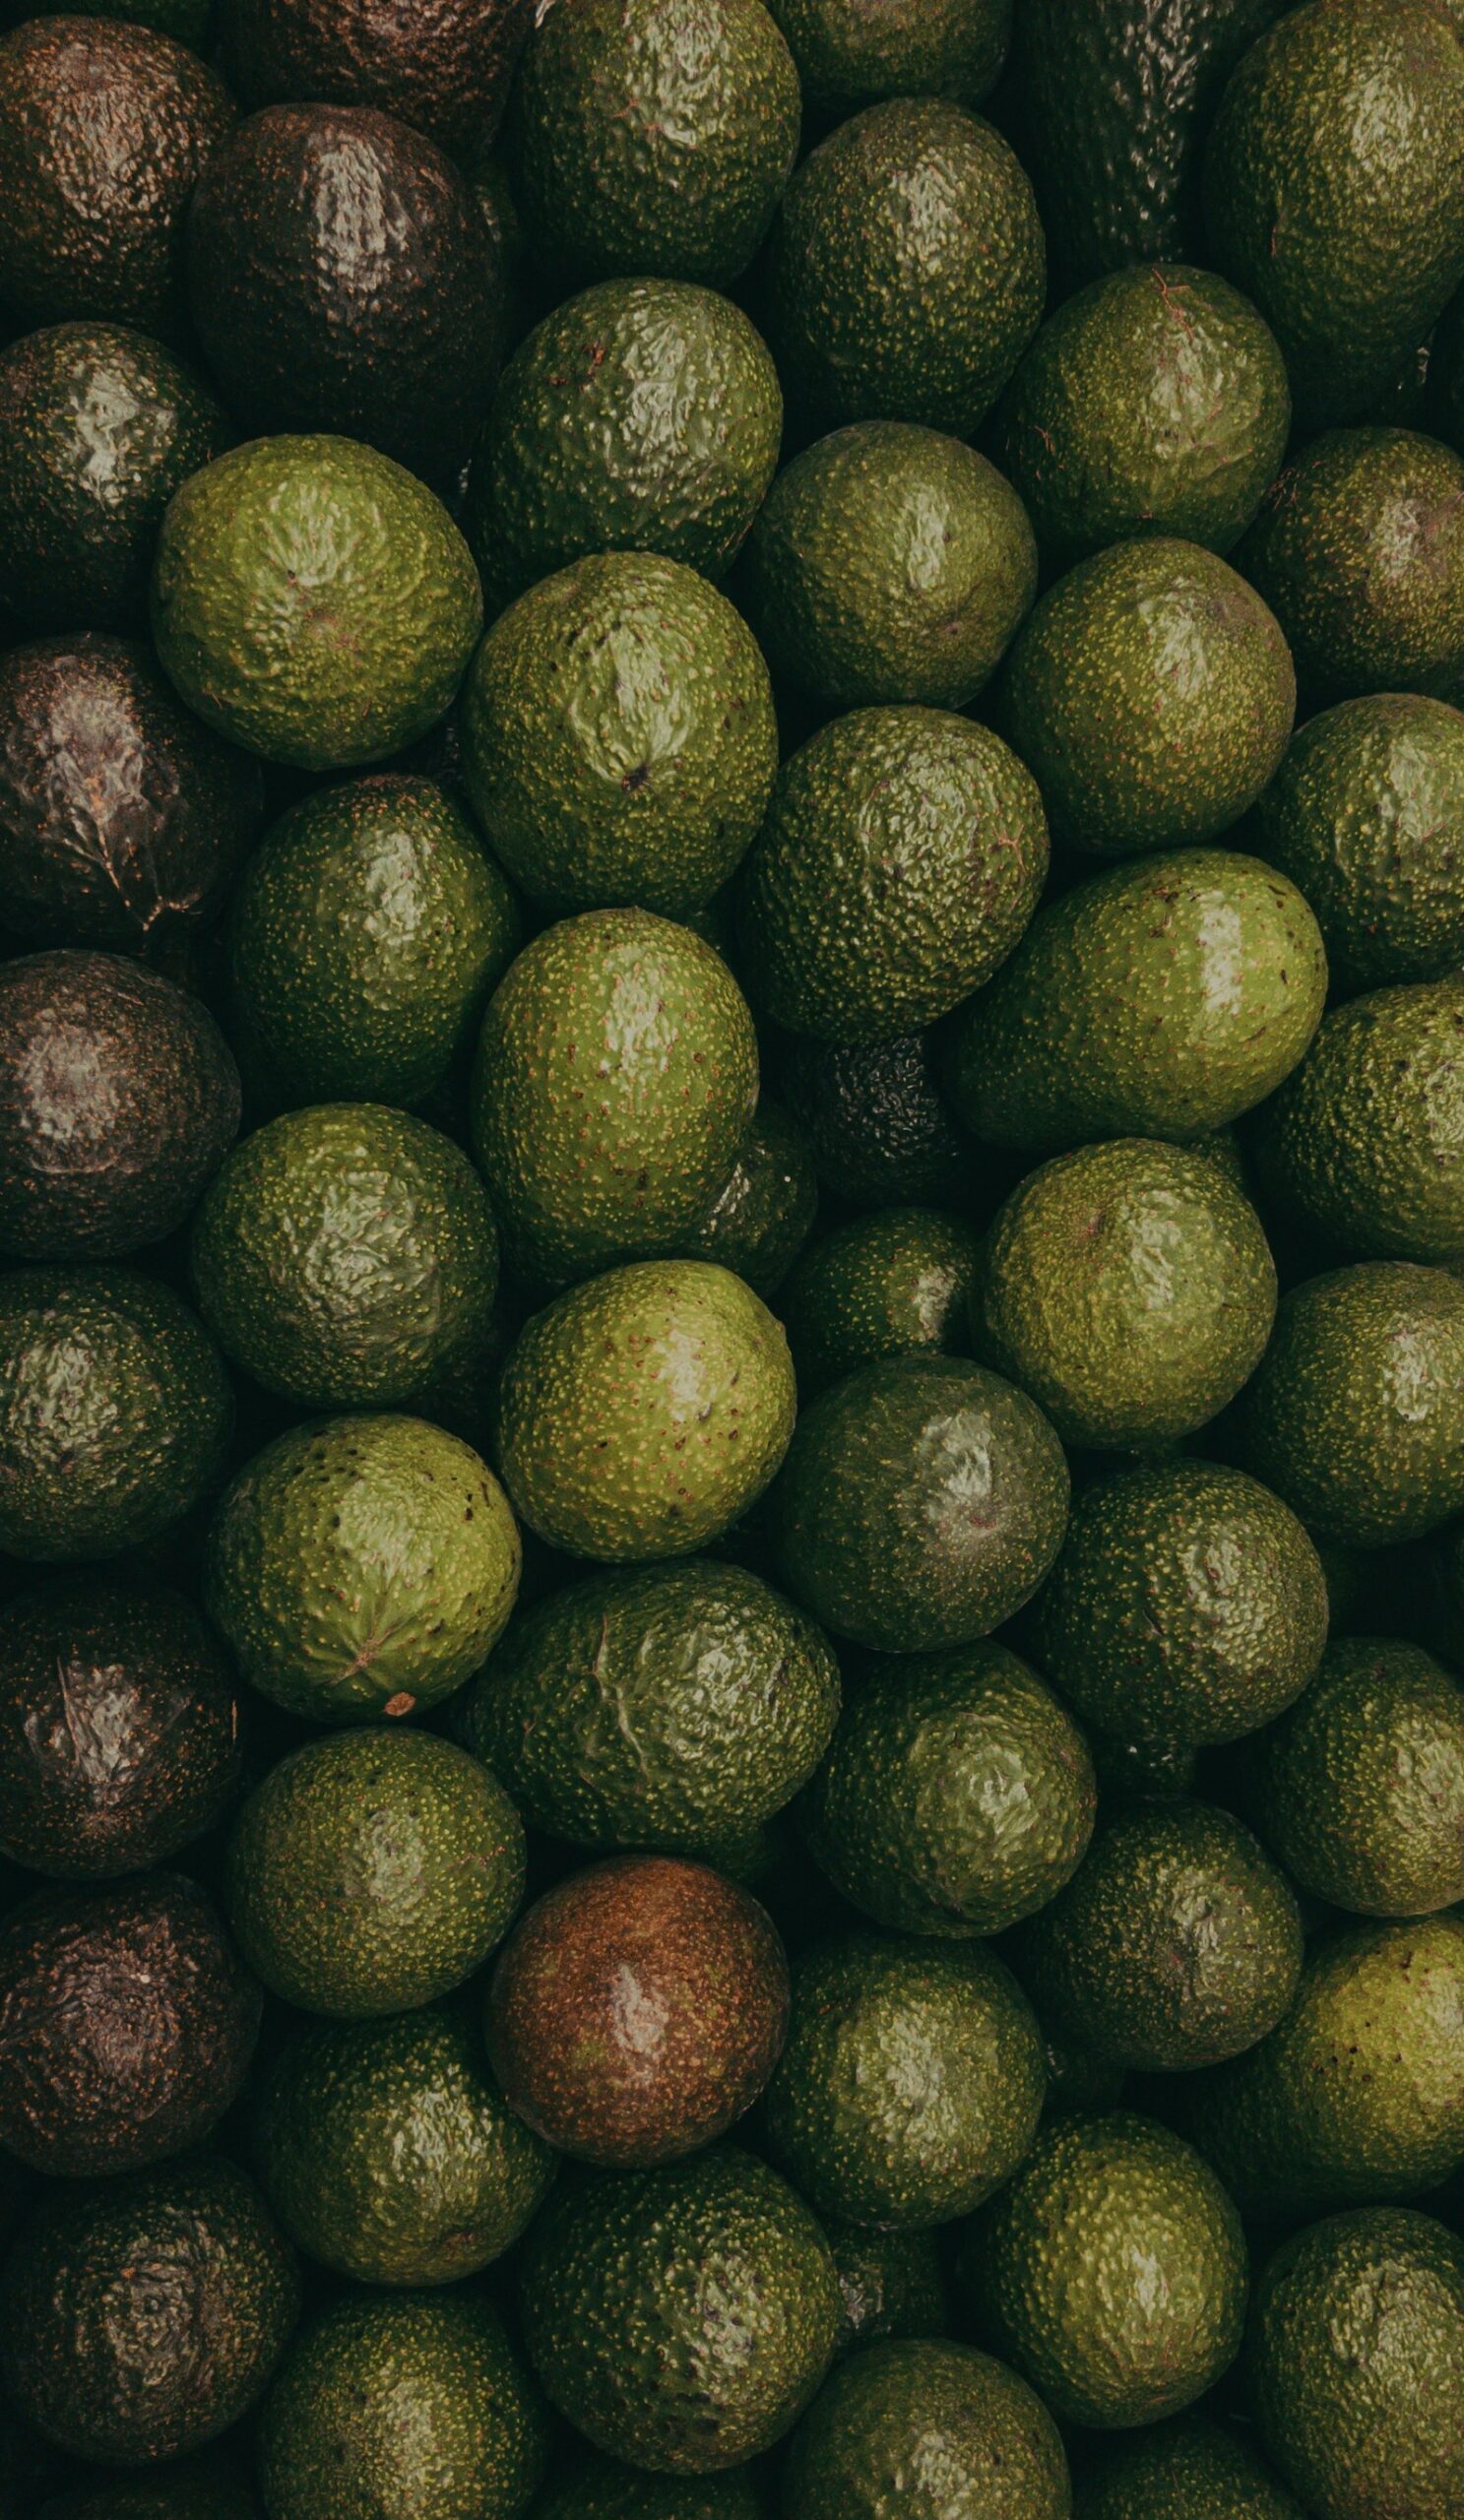 A variety of avocados with different shades of green.